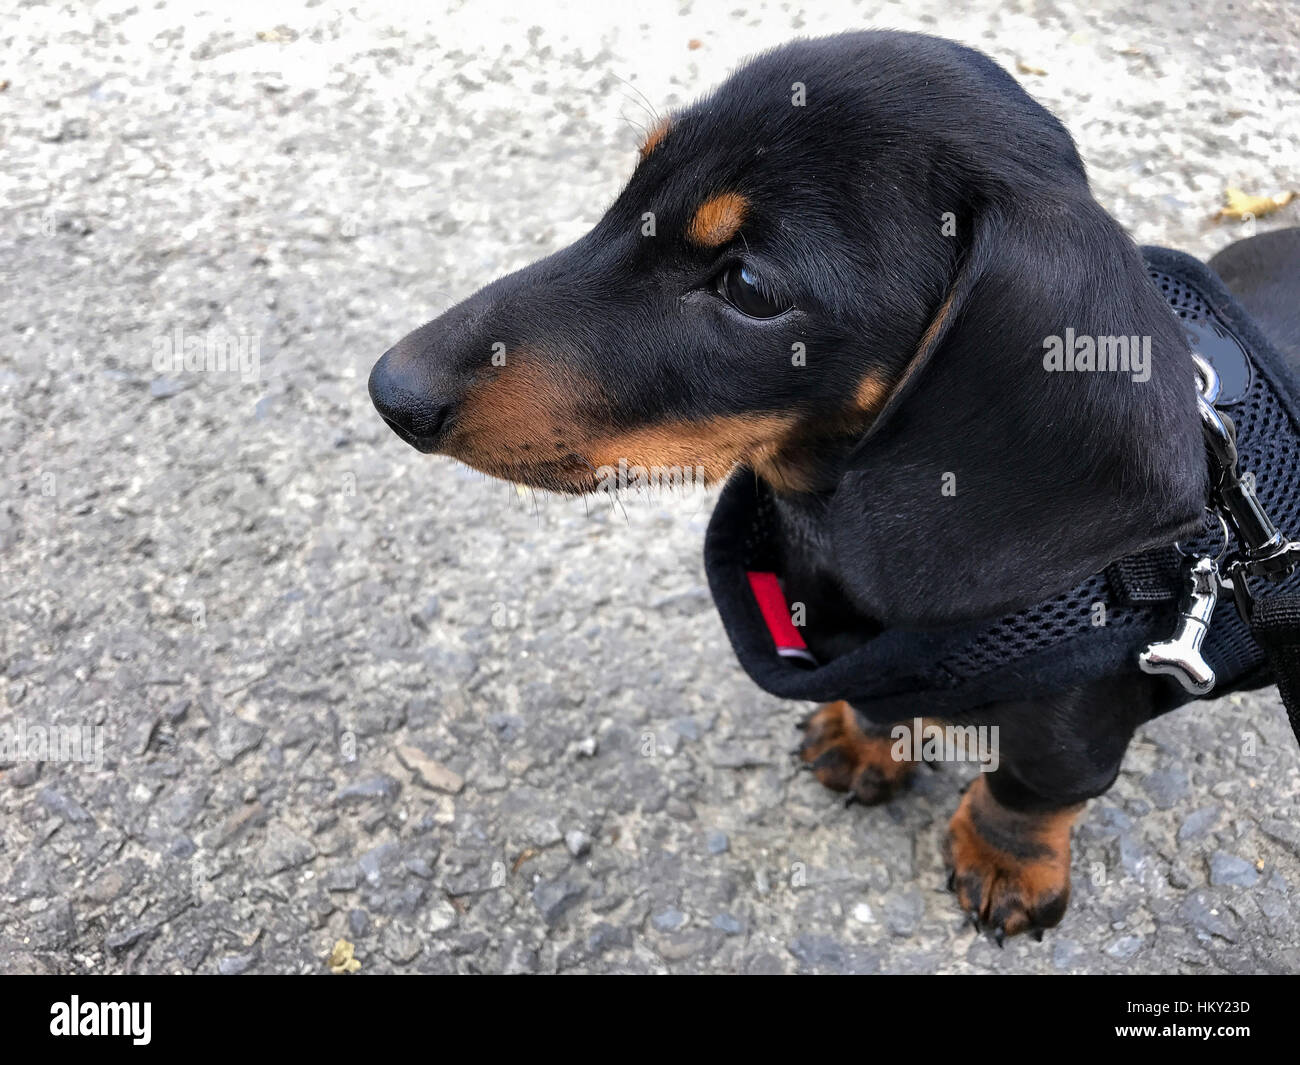 Black and tan miniature smooth-haired Dachshund puppy in profile wearing a harness on the ground Stock Photo